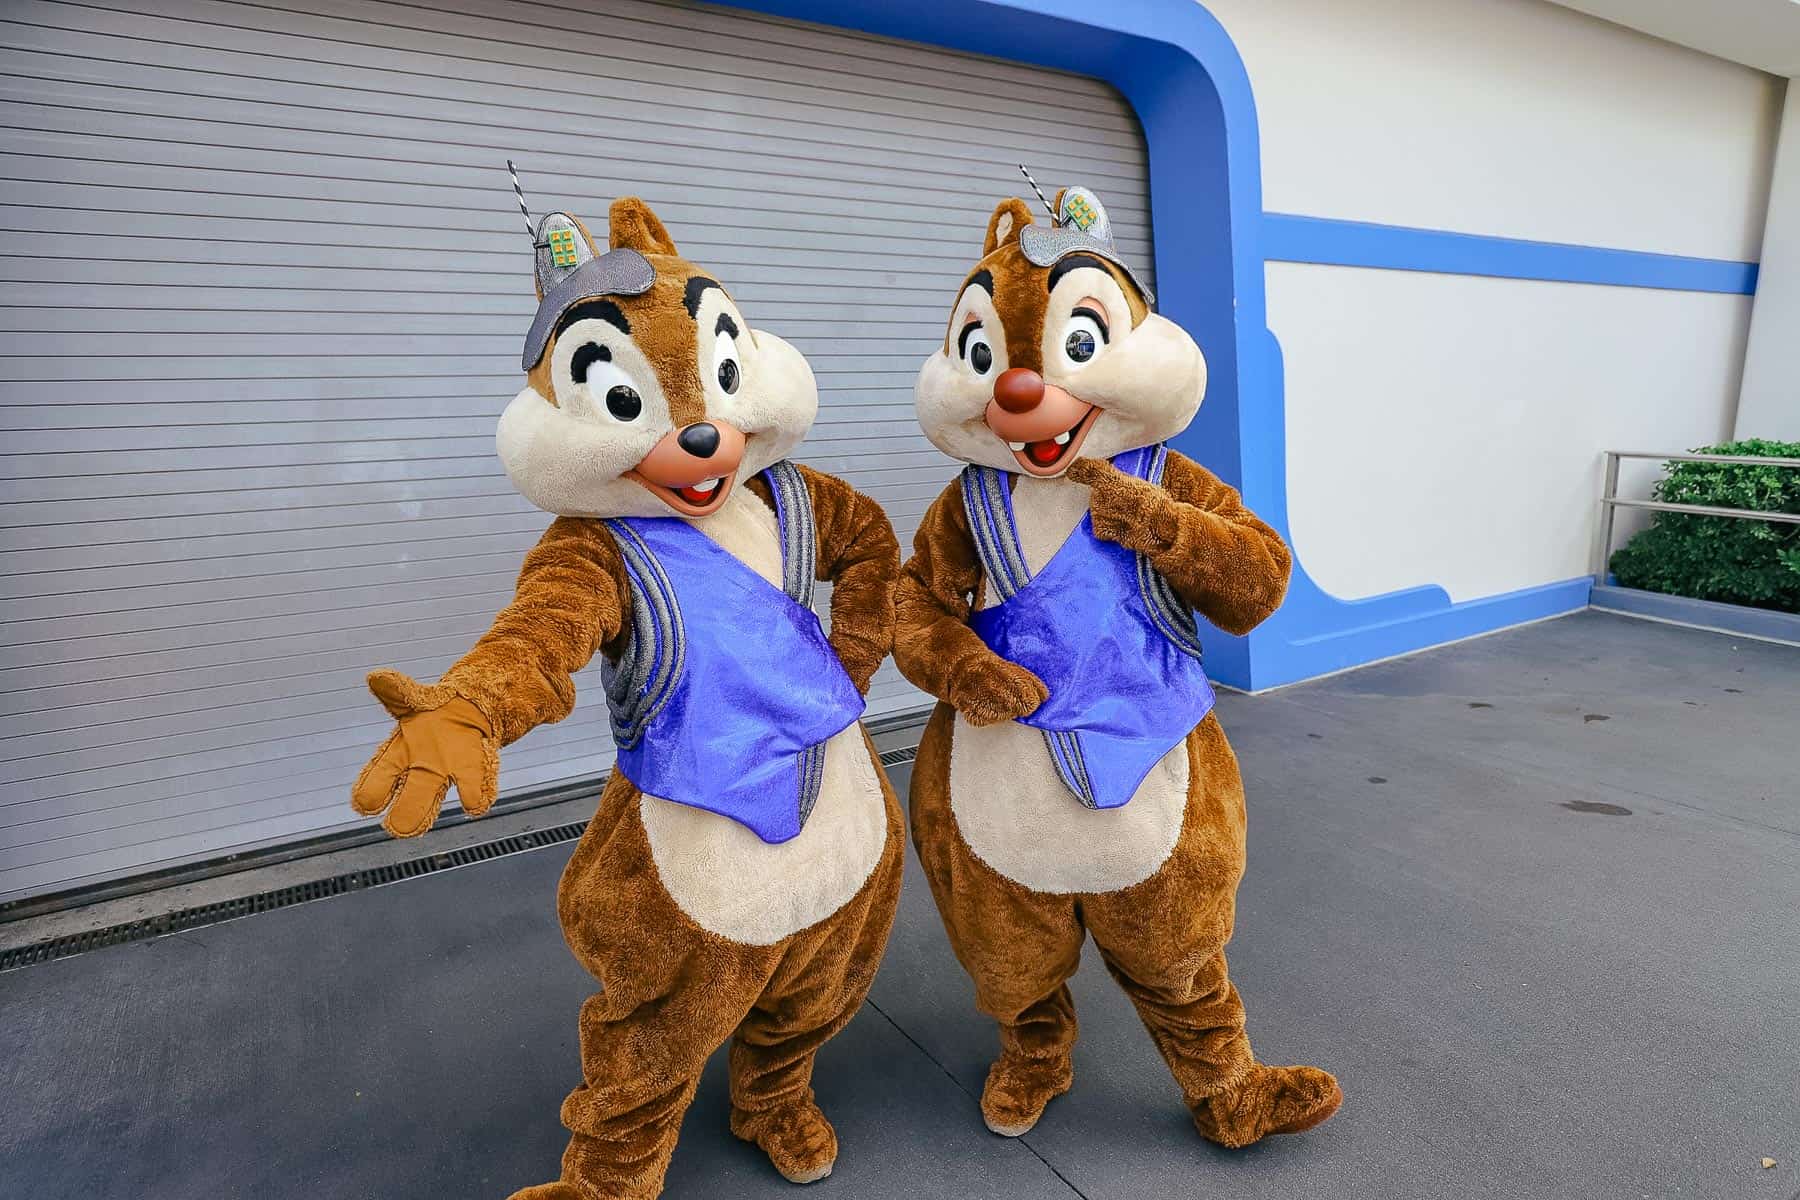 Chip and Dale pose in Tomorrowland at Magic Kingdom. 